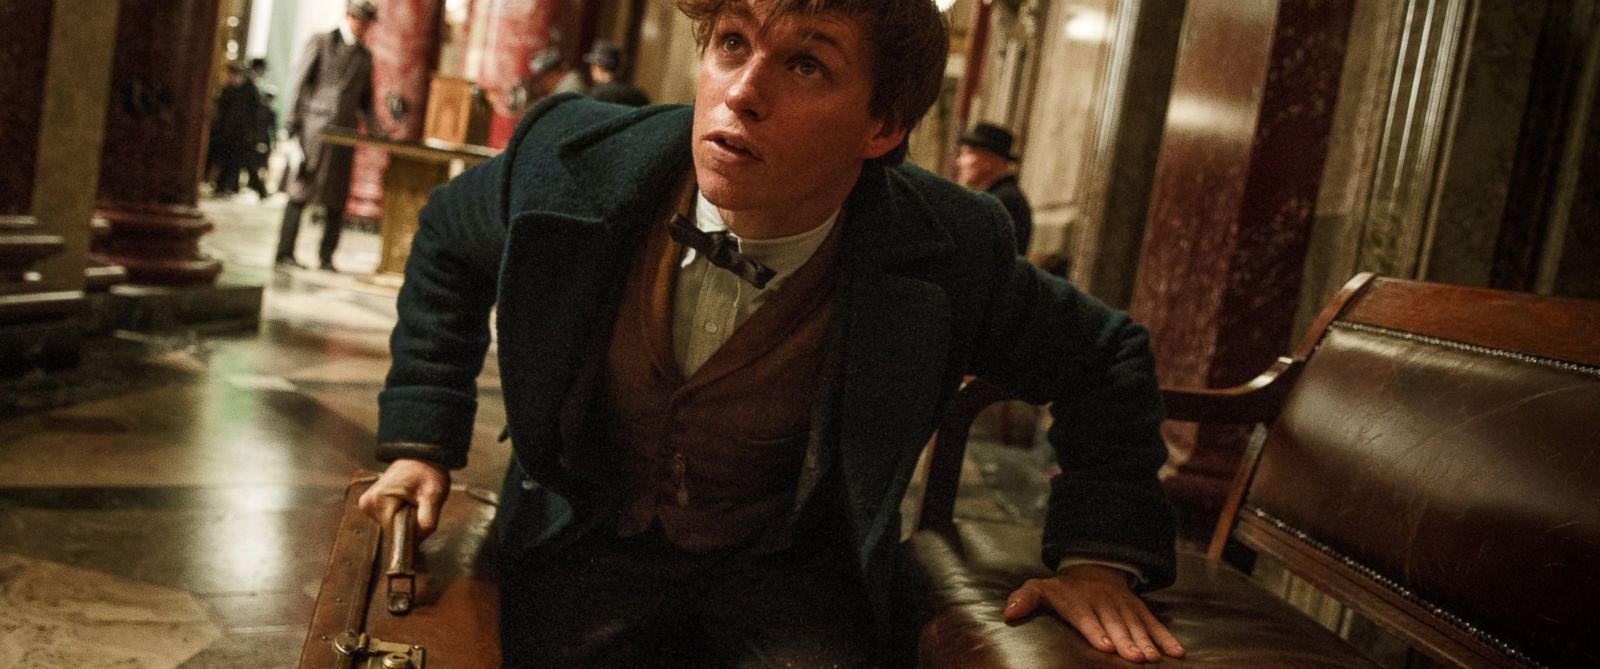 Trailer 2016 Watch Fantastic Beasts And Where To Find Them Online